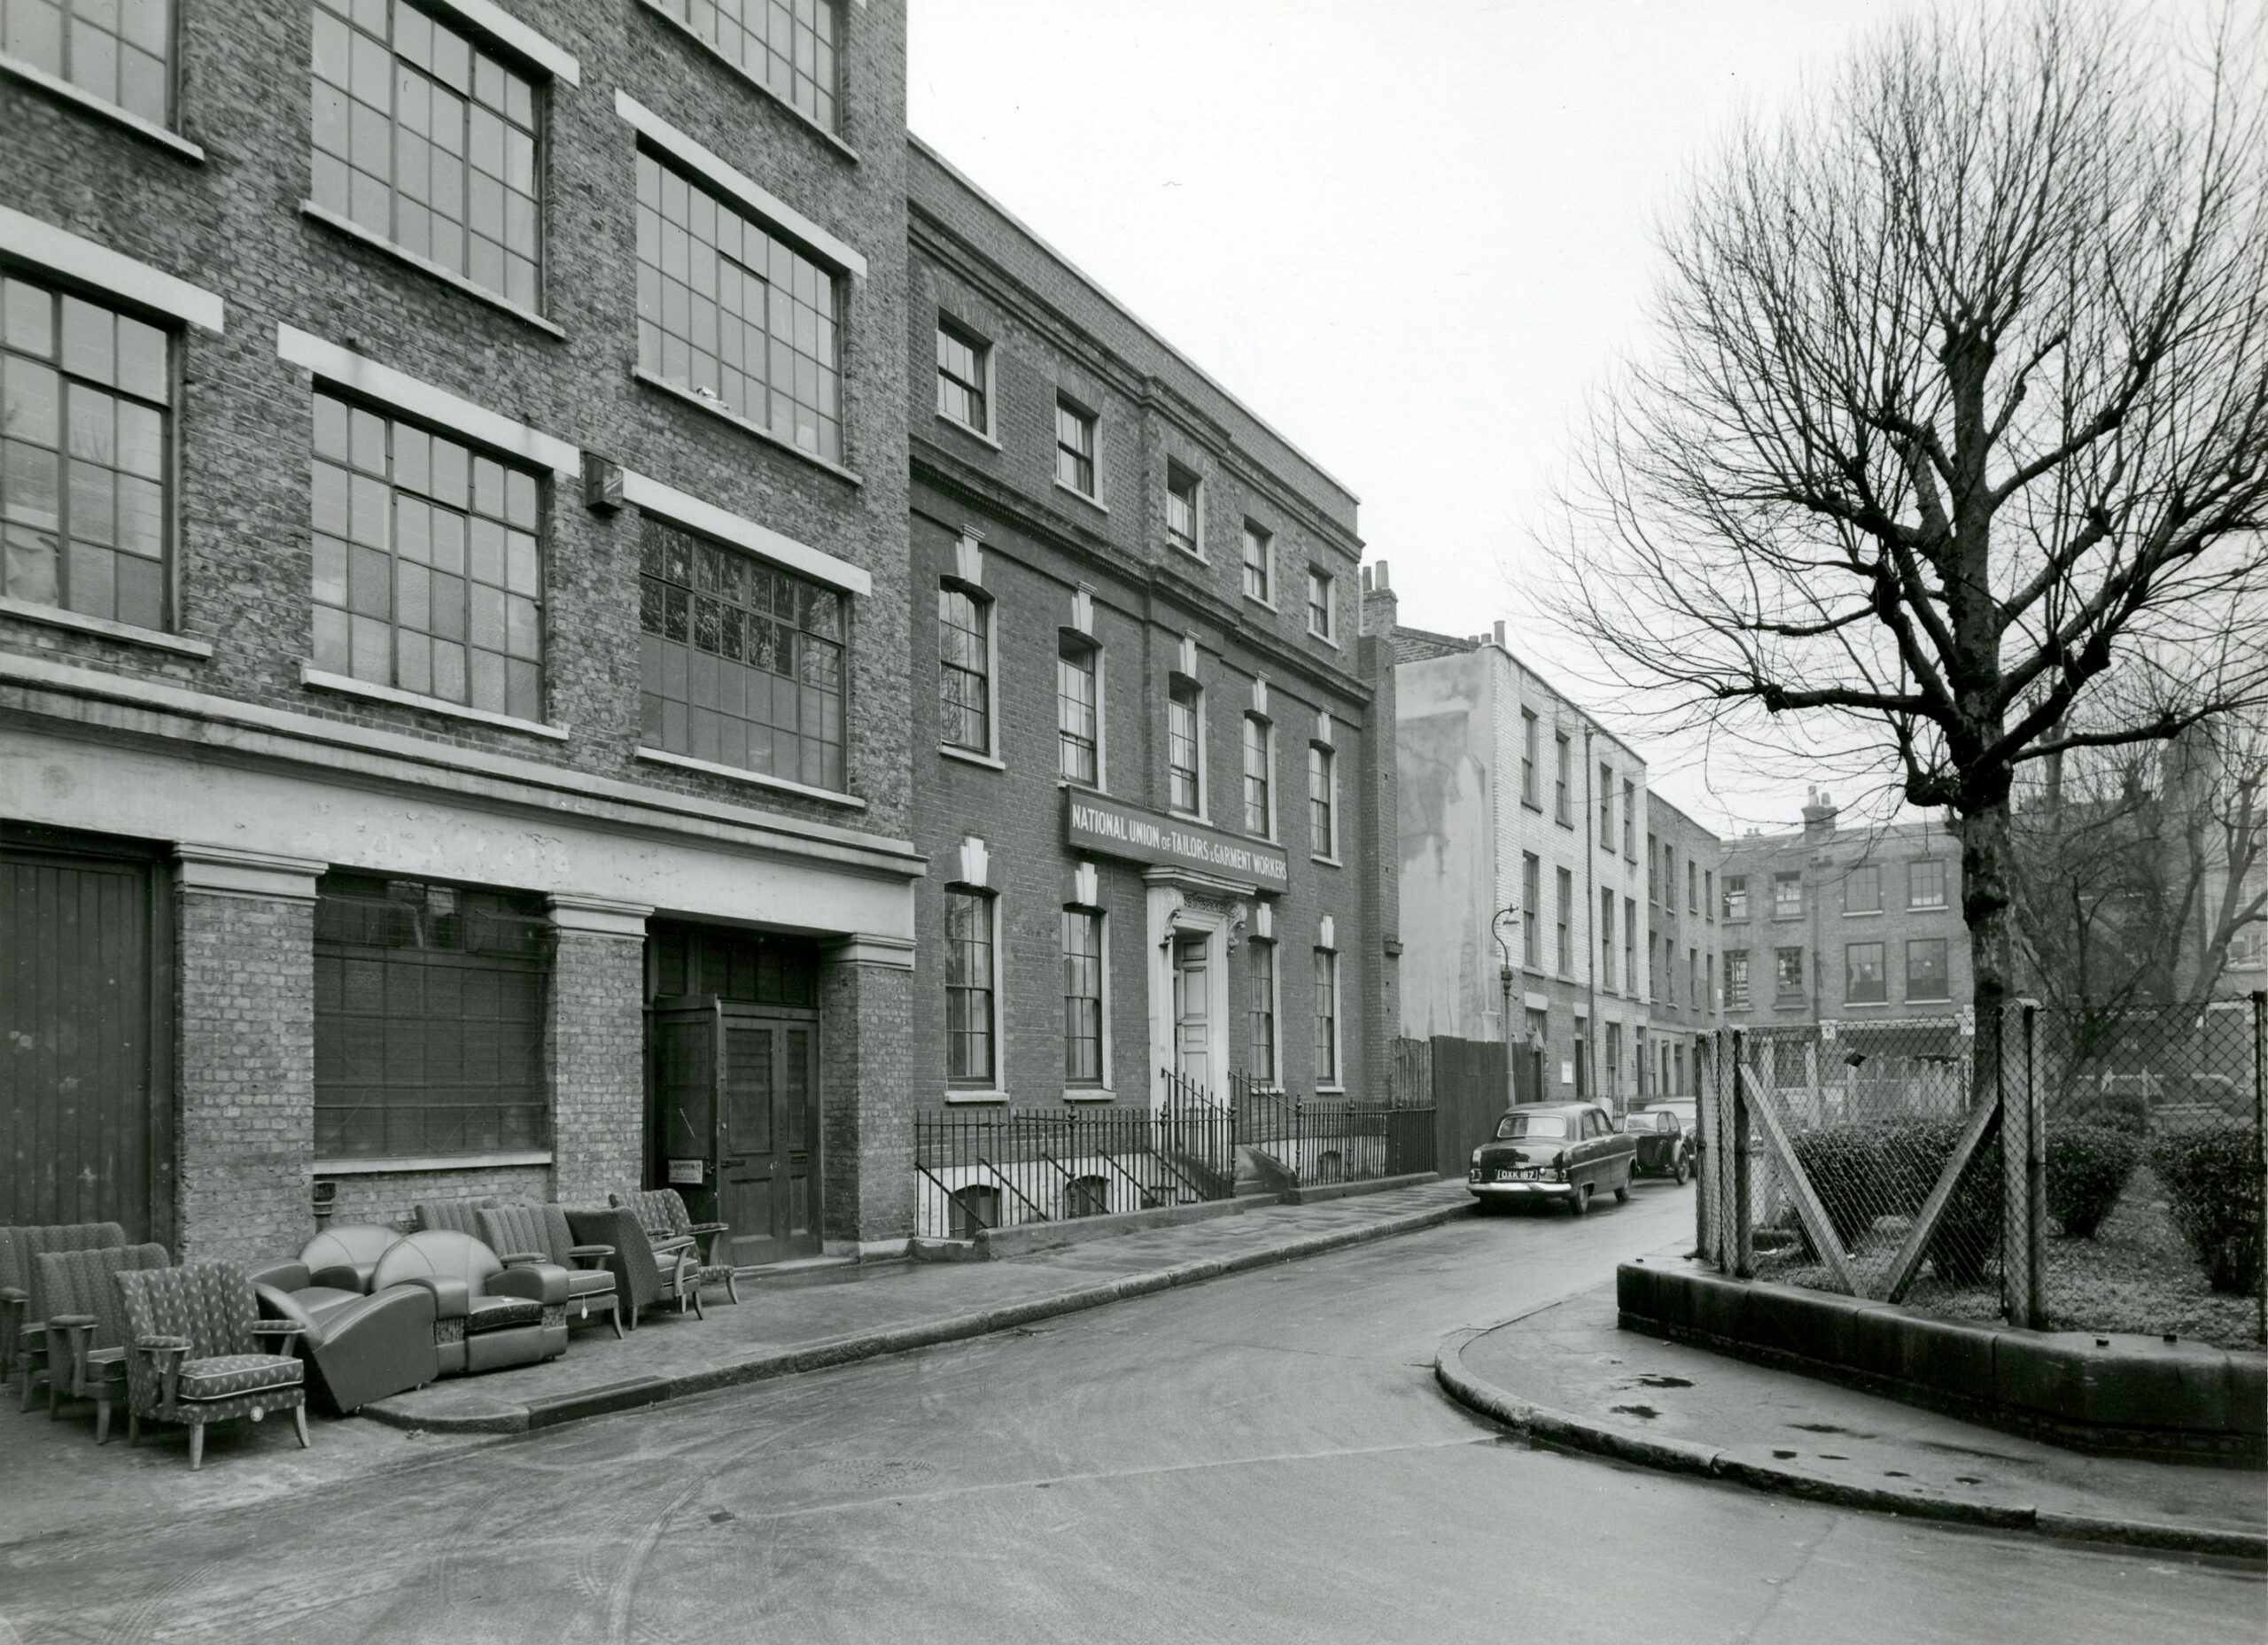 Black and white photo of buildings on Hoxton Square. The middle building is the London headquarters of the National Union of Tailors and Garment Workers, circa 1950s.